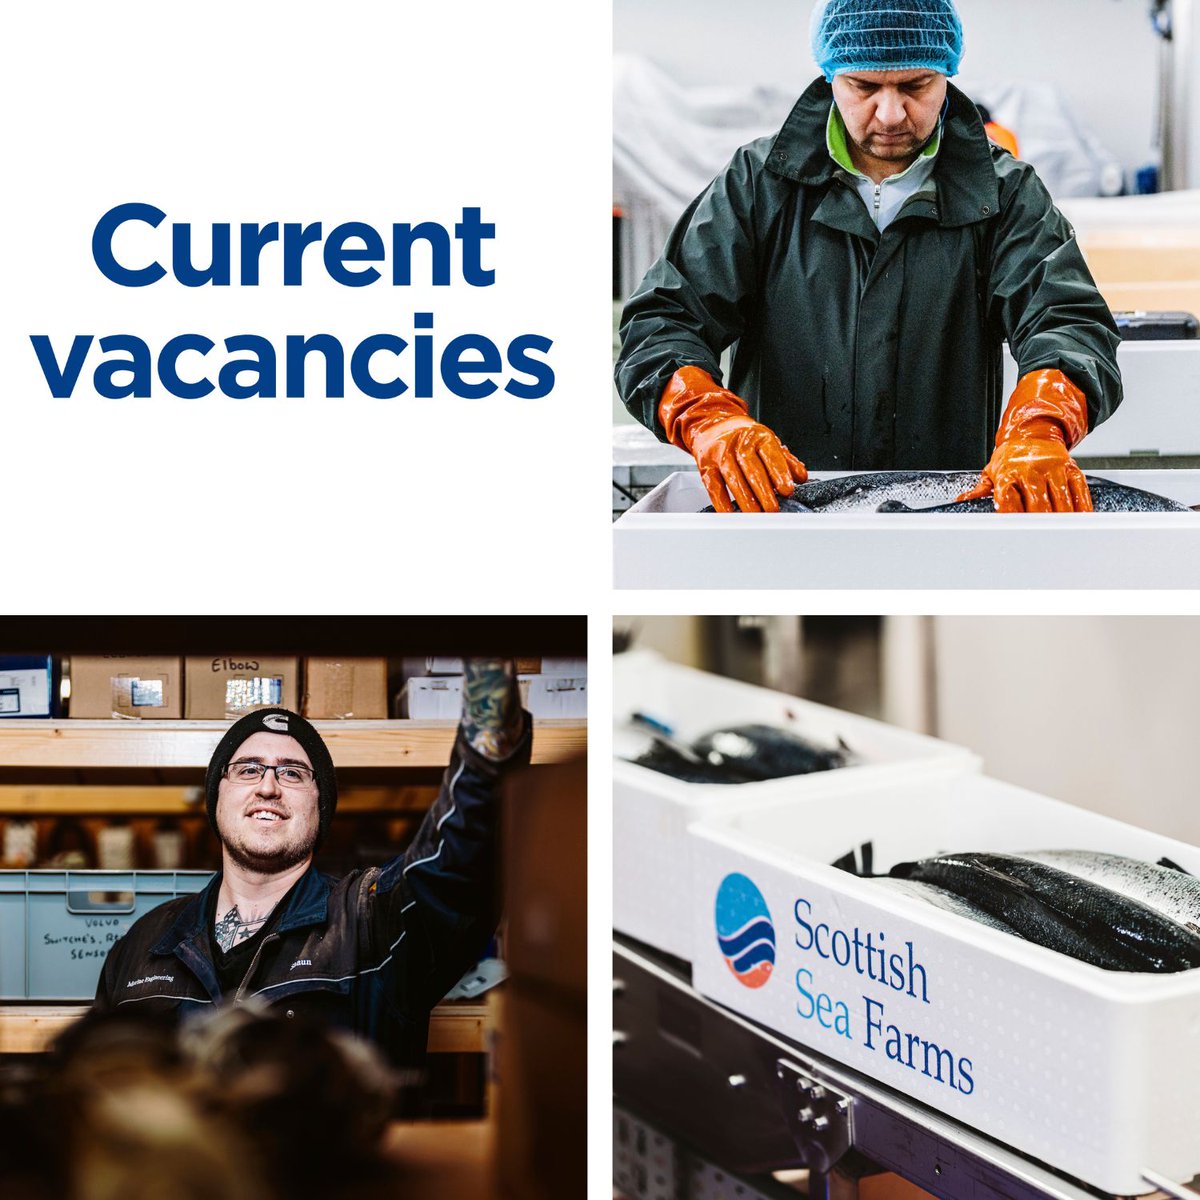 JOBS ROUND-UP | Looking for a summer job? Or maybe you want to take the next step in your career? Check out this week’s #jobsroundup: MARINE ELECTRICIAN Shetland PROCESSING OPERATIVES Shetland or Argyll - part-time, full-time and summer positions More > bit.ly/3PhpXIo